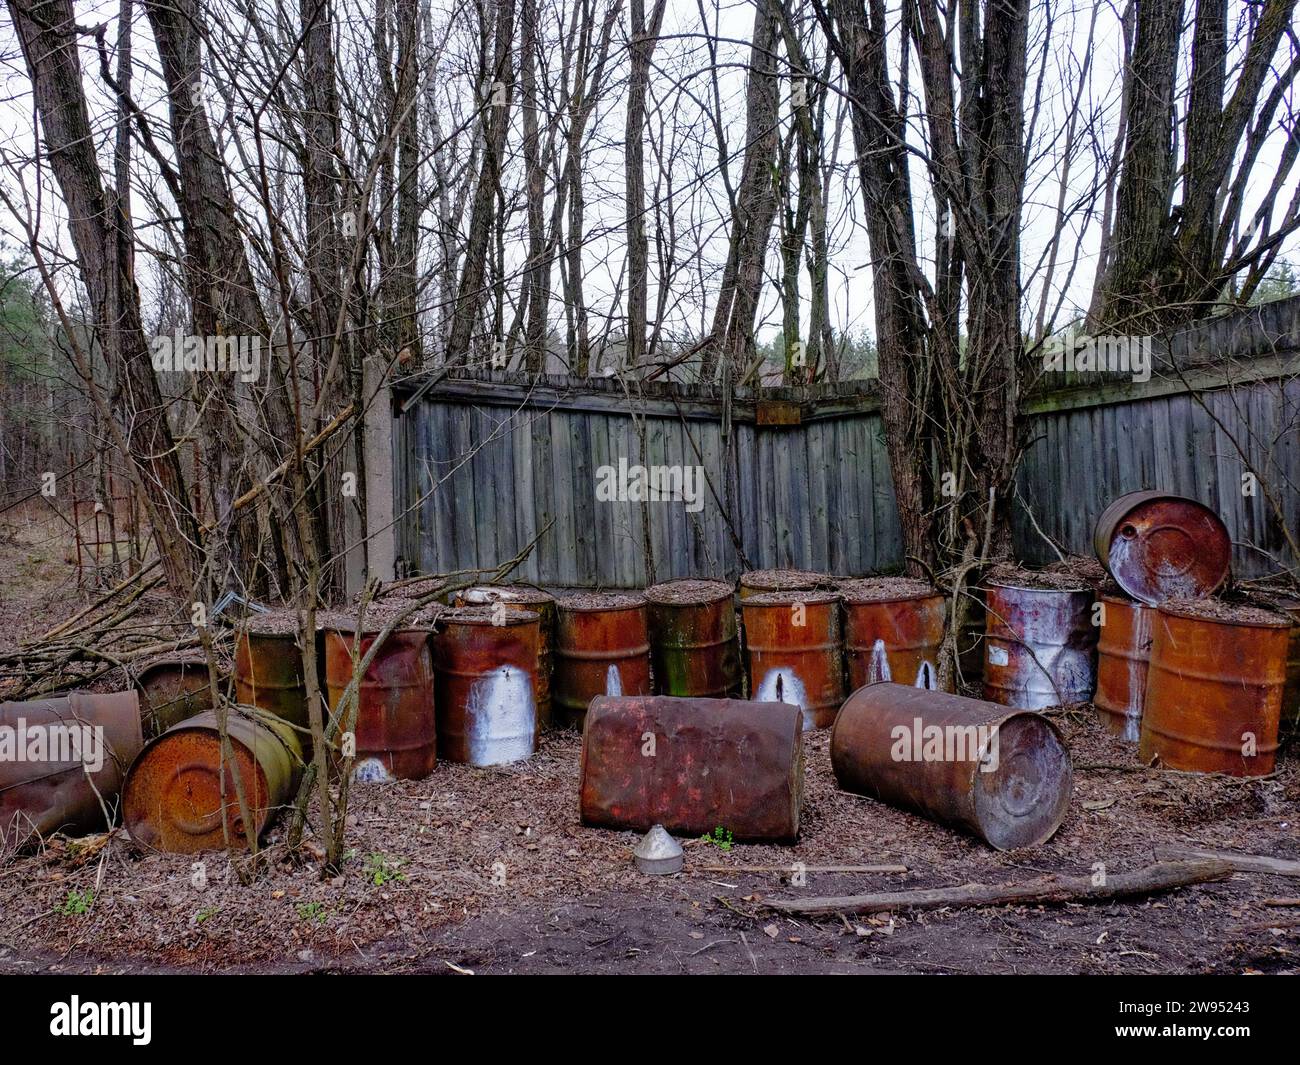 This image shows rusty barrels that are scattered in front of a wooden fence. Stock Photo